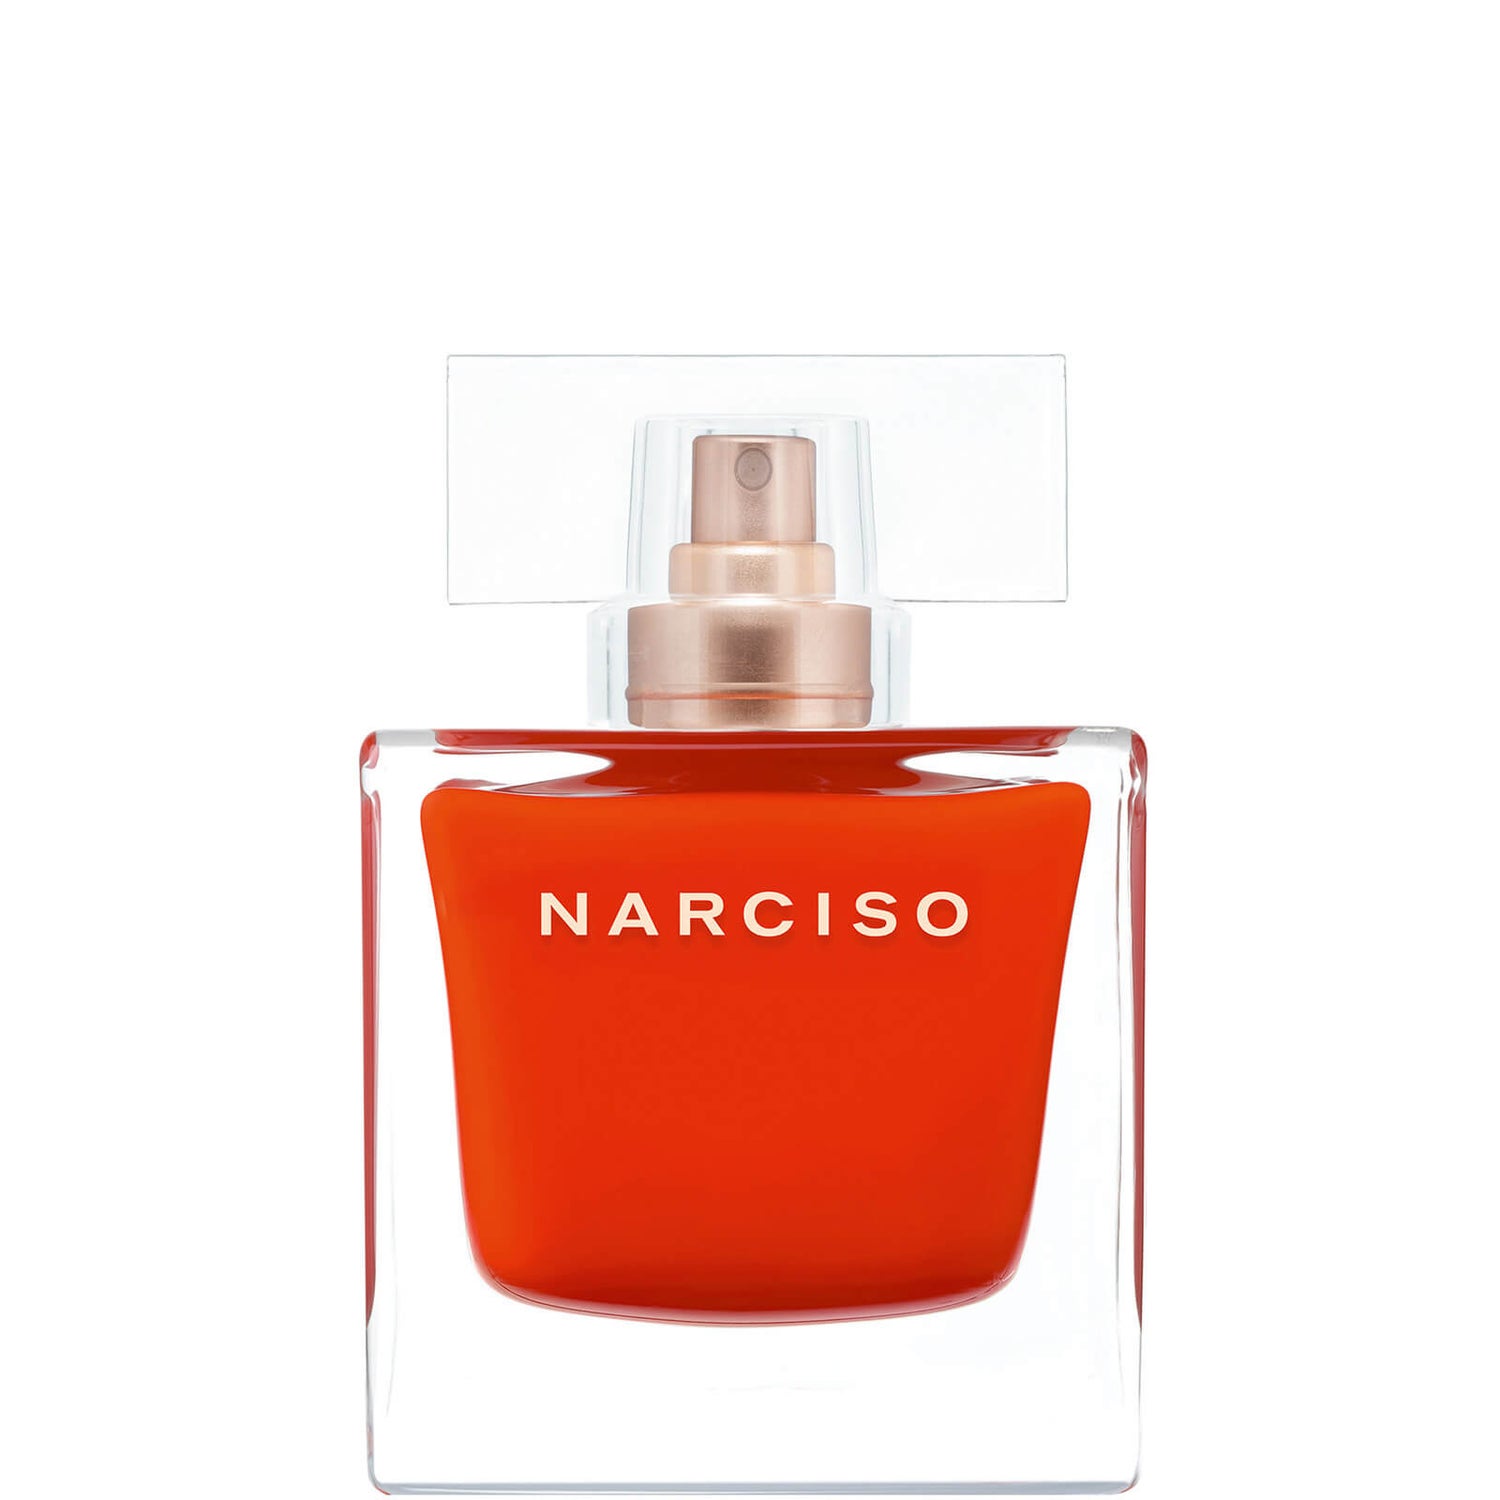 Туалетная вода narciso. Narciso Rodriguez Narciso rouge EDT (Tester 90 мл). Narciso rouge 90 мл. Narciso Eau de Parfum rouge Rodriguez 90 мл. Narciso Rodriguez Narciso Eau de Toilette 90 ml.